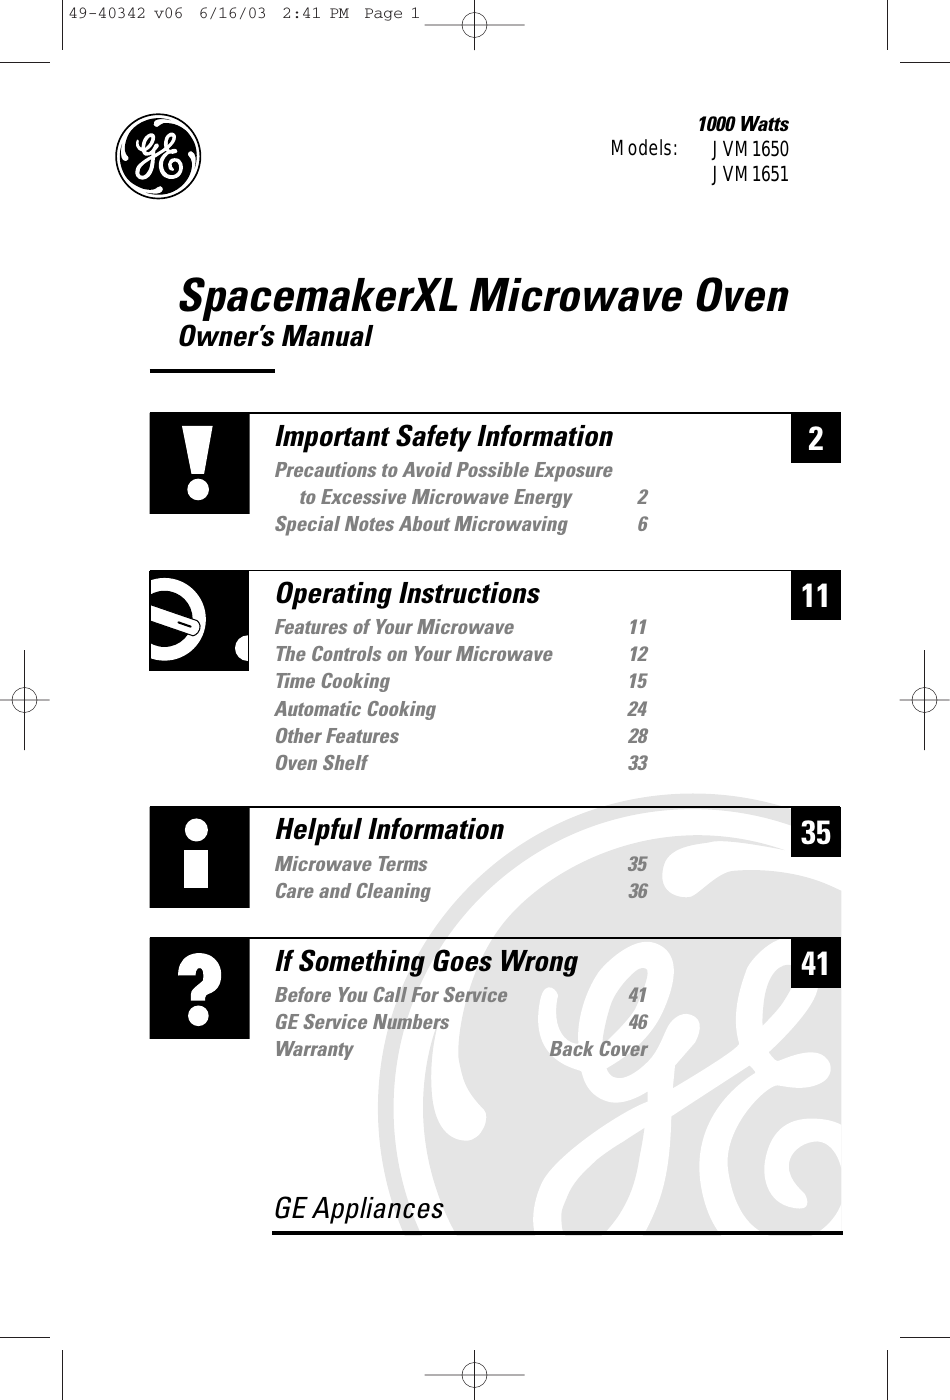 SpacemakerXL Microwave OvenOwner’s Manual1000 Watts JVM1650JVM1651235Helpful InformationMicrowave Terms  35Care and Cleaning 3641If Something Goes WrongBefore You Call For Service 41GE Service Numbers 46Warranty Back CoverGE Appliances11Important Safety InformationPrecautions to Avoid Possible Exposure to Excessive Microwave Energy 2Special Notes About Microwaving 6Operating InstructionsFeatures of Your Microwave 11The Controls on Your Microwave 12Time Cooking 15Automatic Cooking 24Other Features 28Oven Shelf  33Models: 49-40342 v06  6/16/03  2:41 PM  Page 1